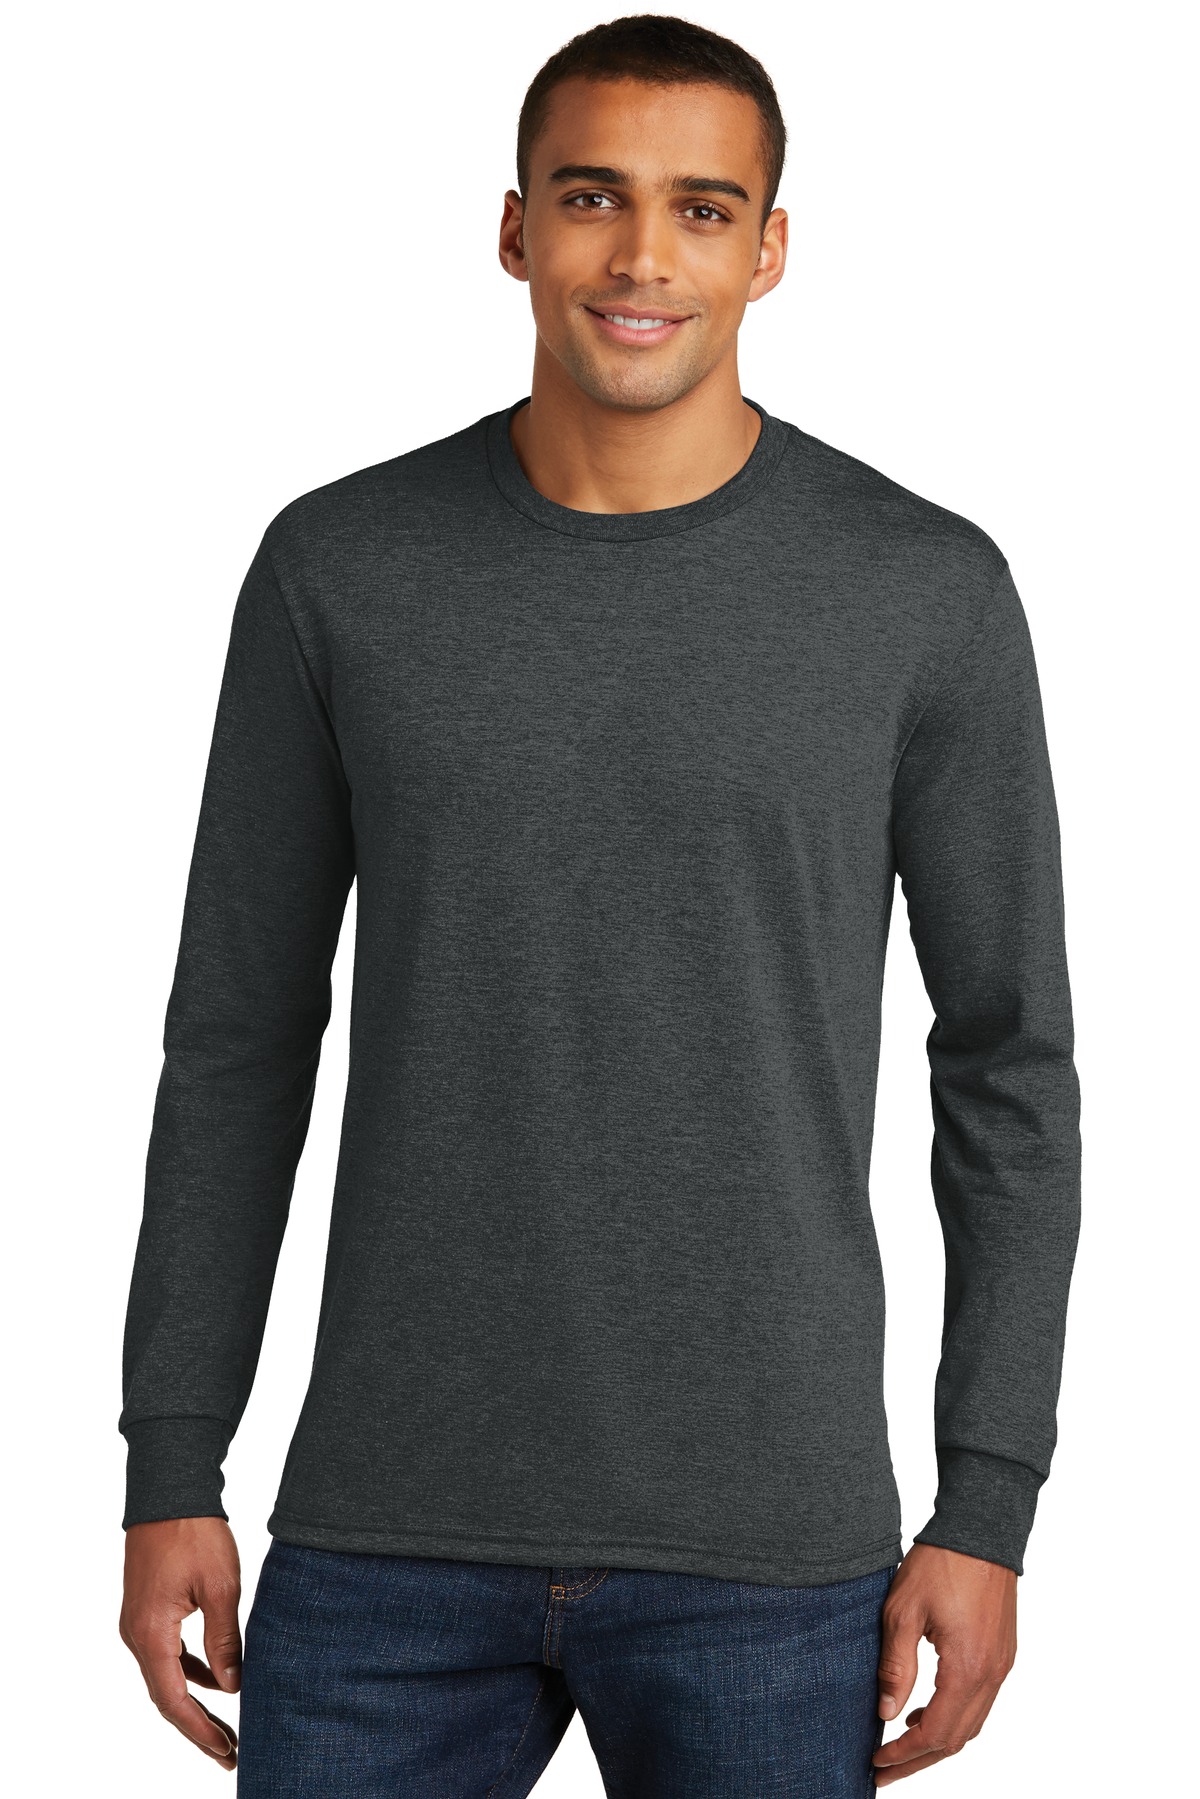 District Hospitality T-Shirts ® Perfect Tri® Long Sleeve Tee .-District